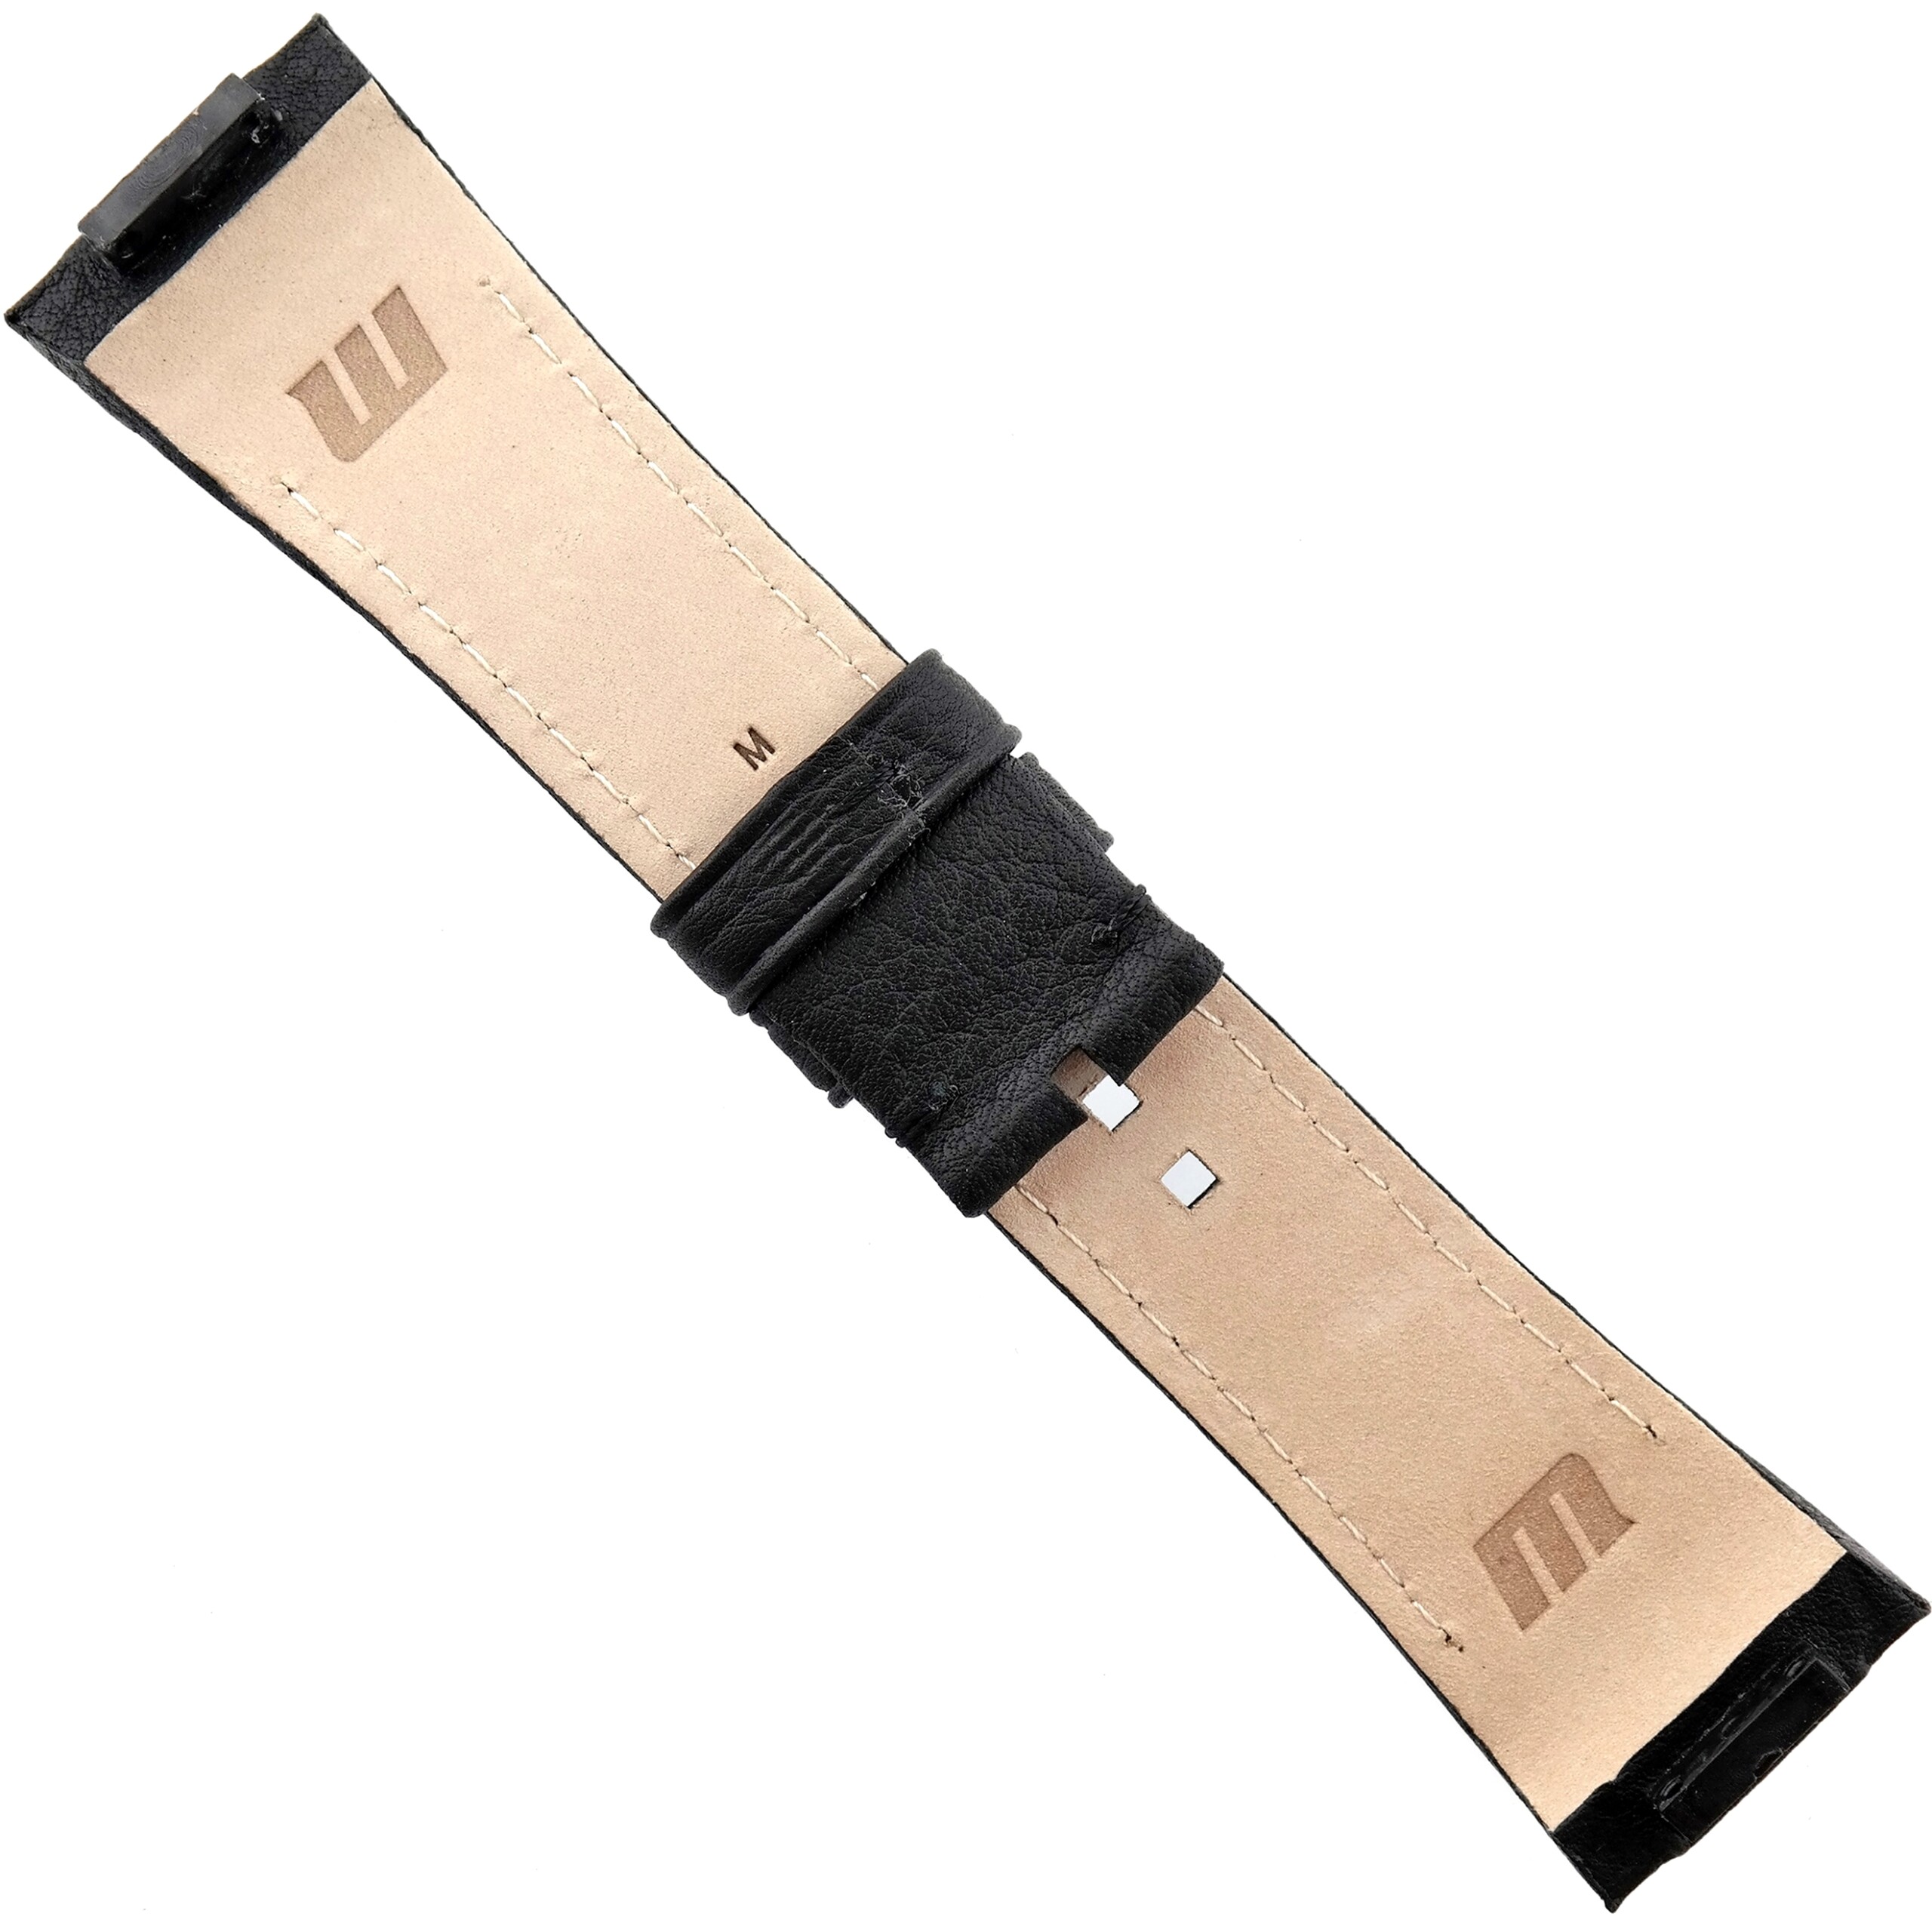 WYLER Geneve - CODE R/S - Leather Watch Strap - M - Black